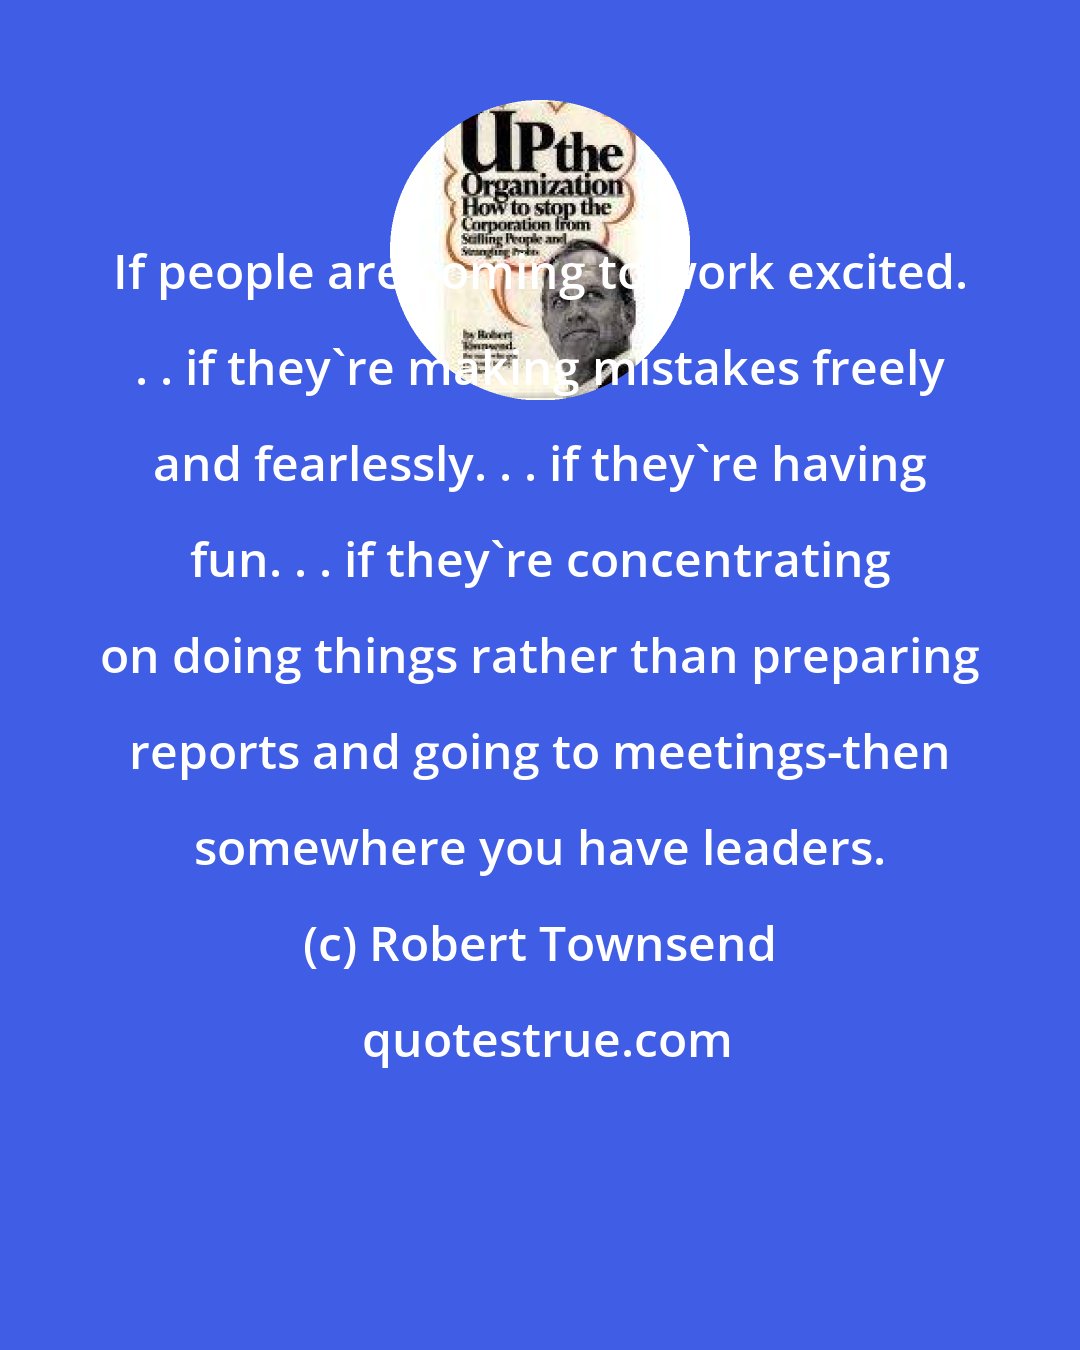 Robert Townsend: If people are coming to work excited. . . if they're making mistakes freely and fearlessly. . . if they're having fun. . . if they're concentrating on doing things rather than preparing reports and going to meetings-then somewhere you have leaders.